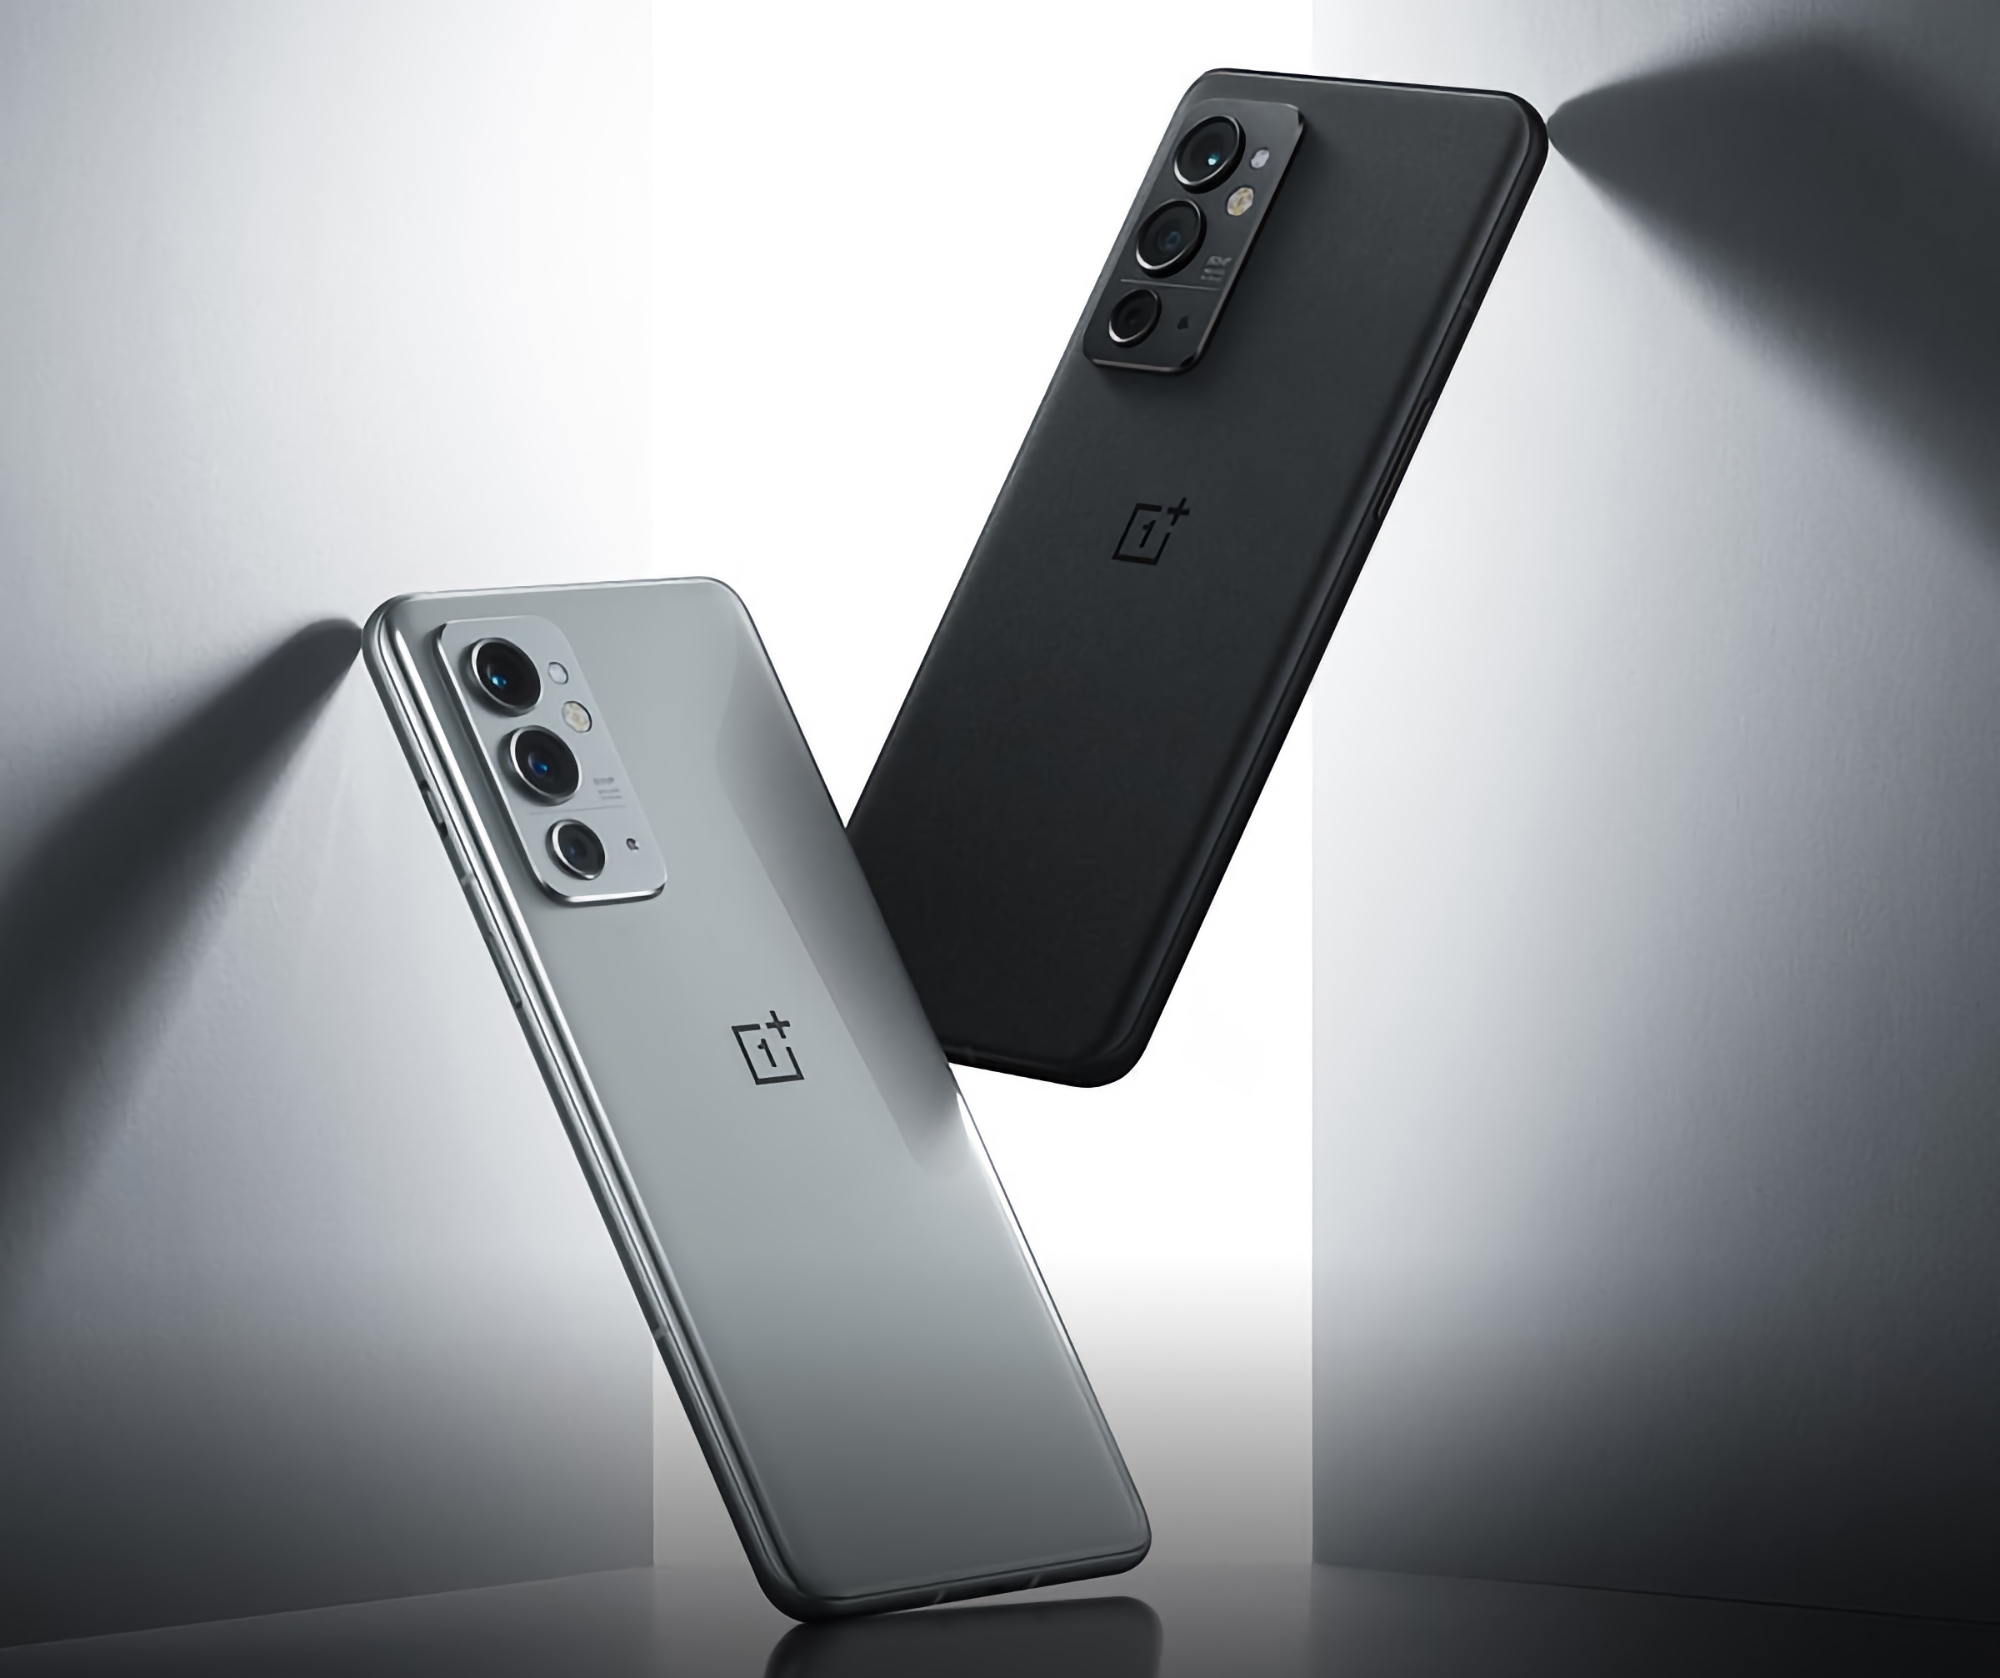 OnePlus starts testing OxygenOS 12 based on Android 12 for OnePlus 9 RT